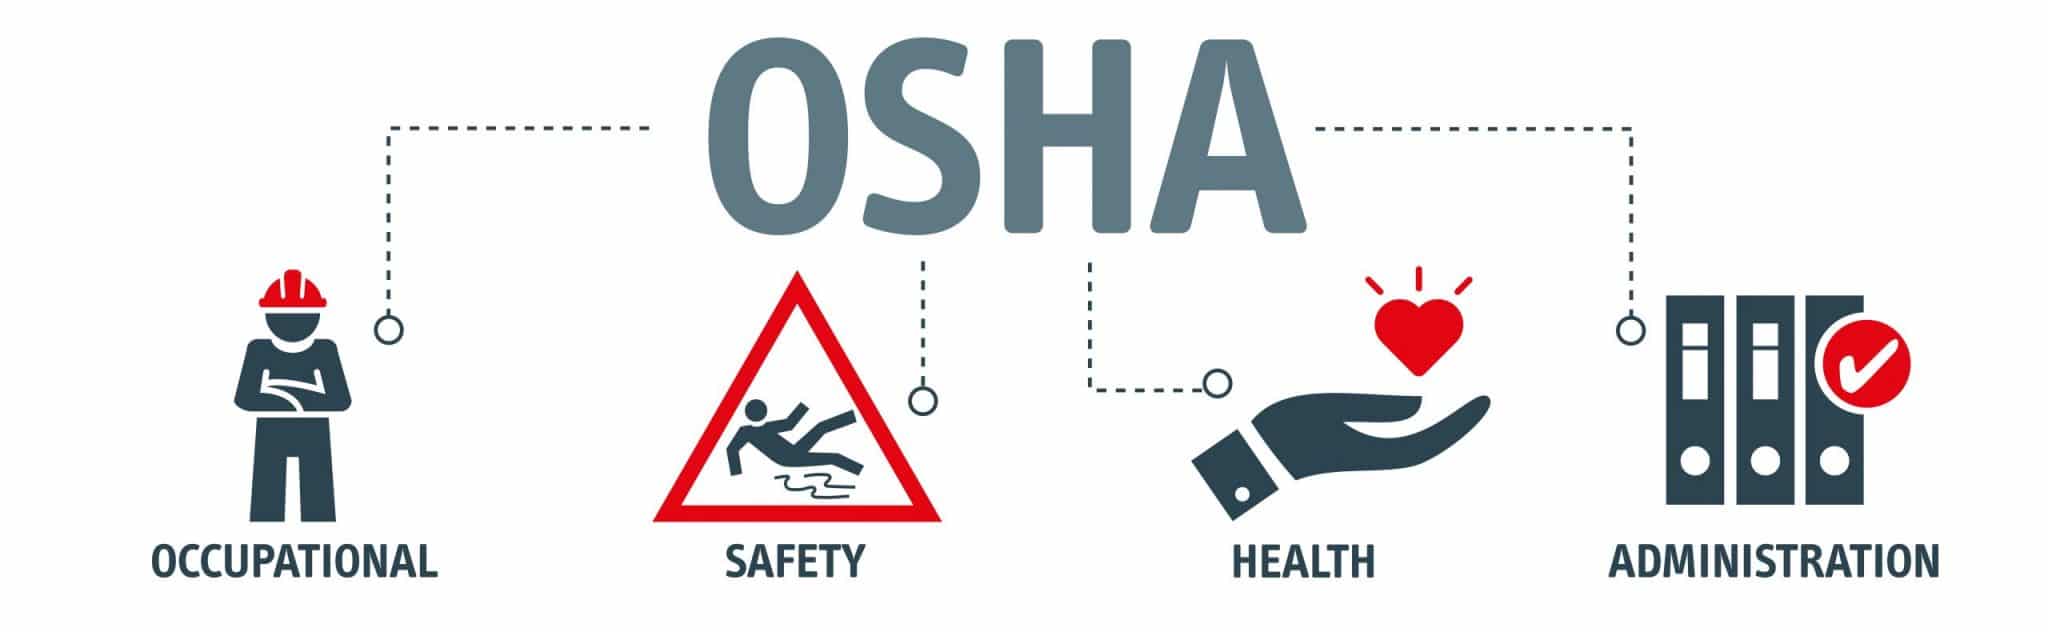 2019 Most Frequently Cited OSHA Standards - Van Wyk Risk Solutions